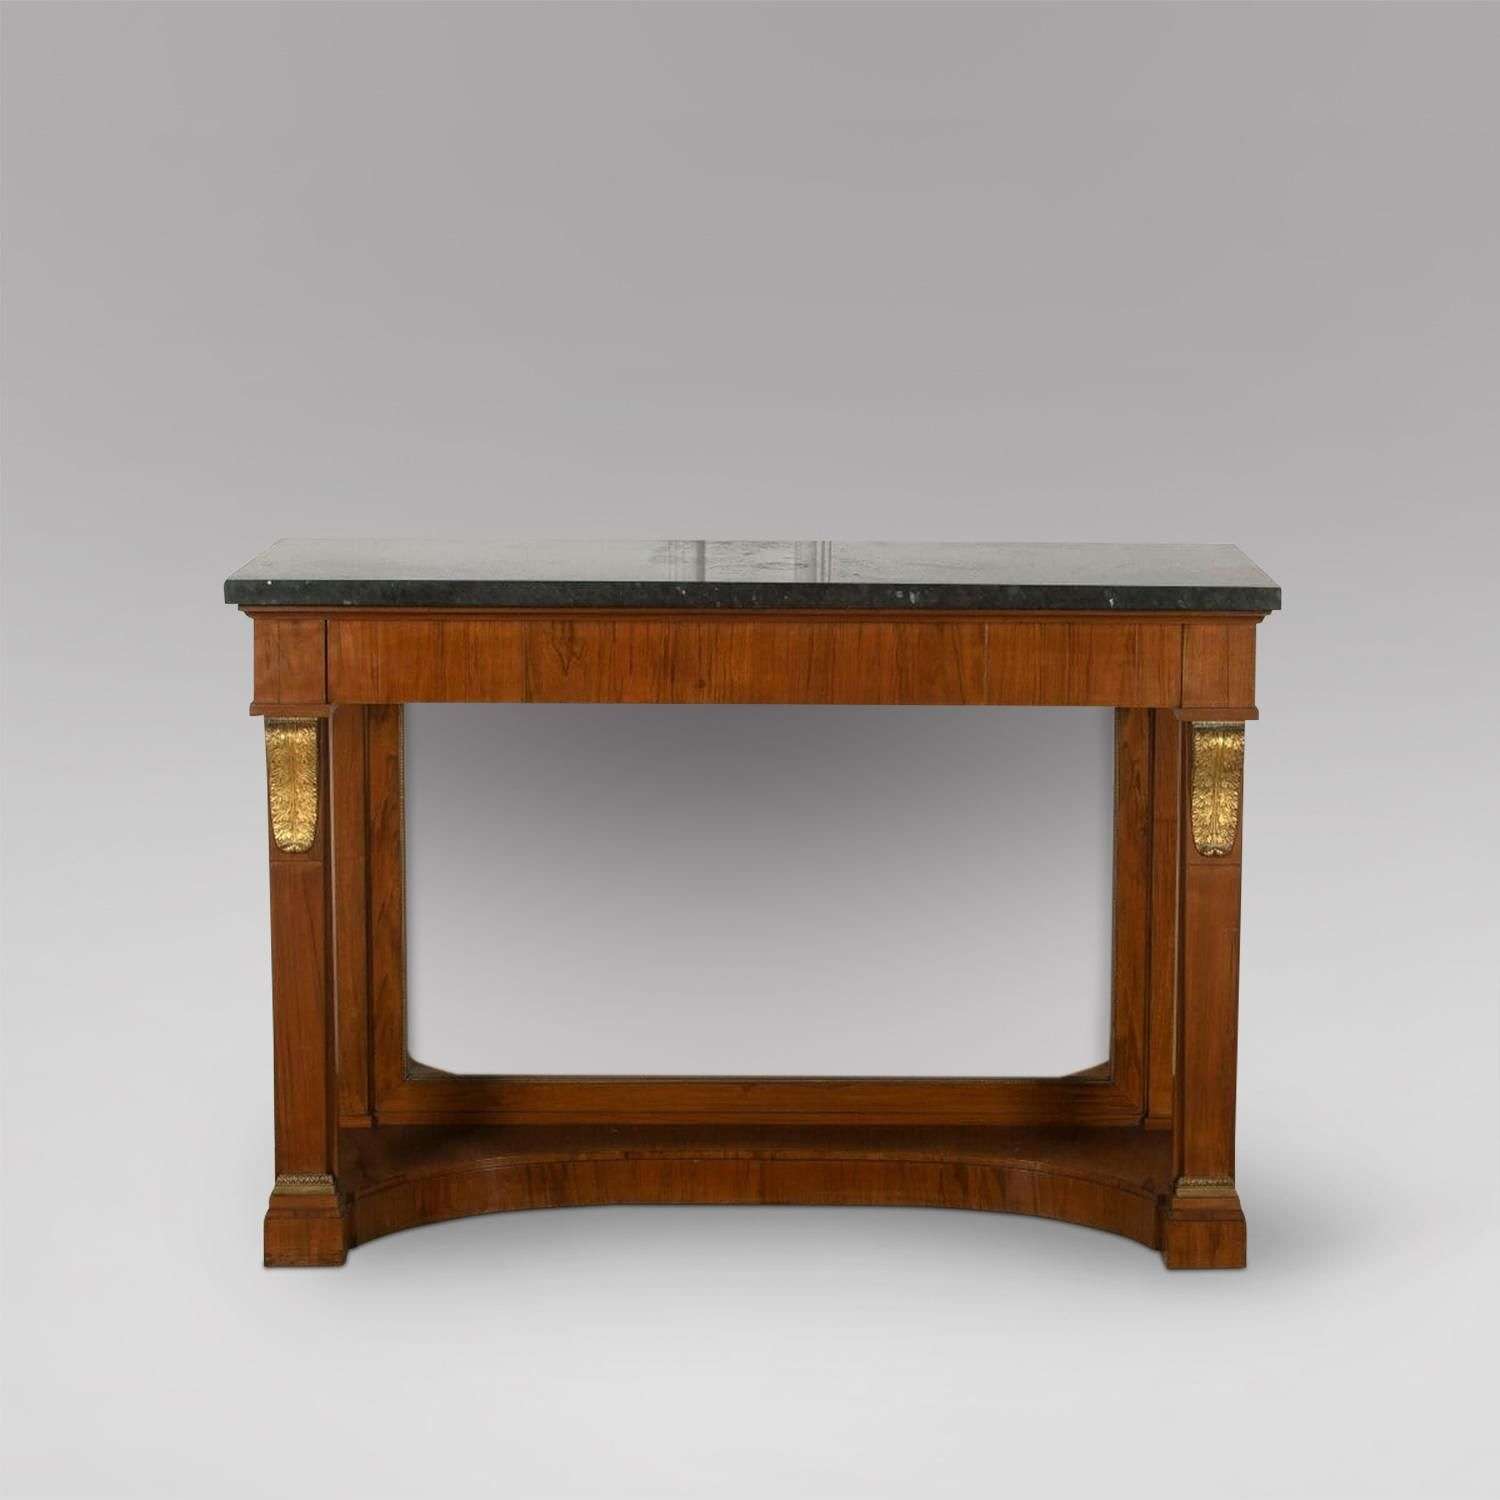 A Granite Topped Console Table